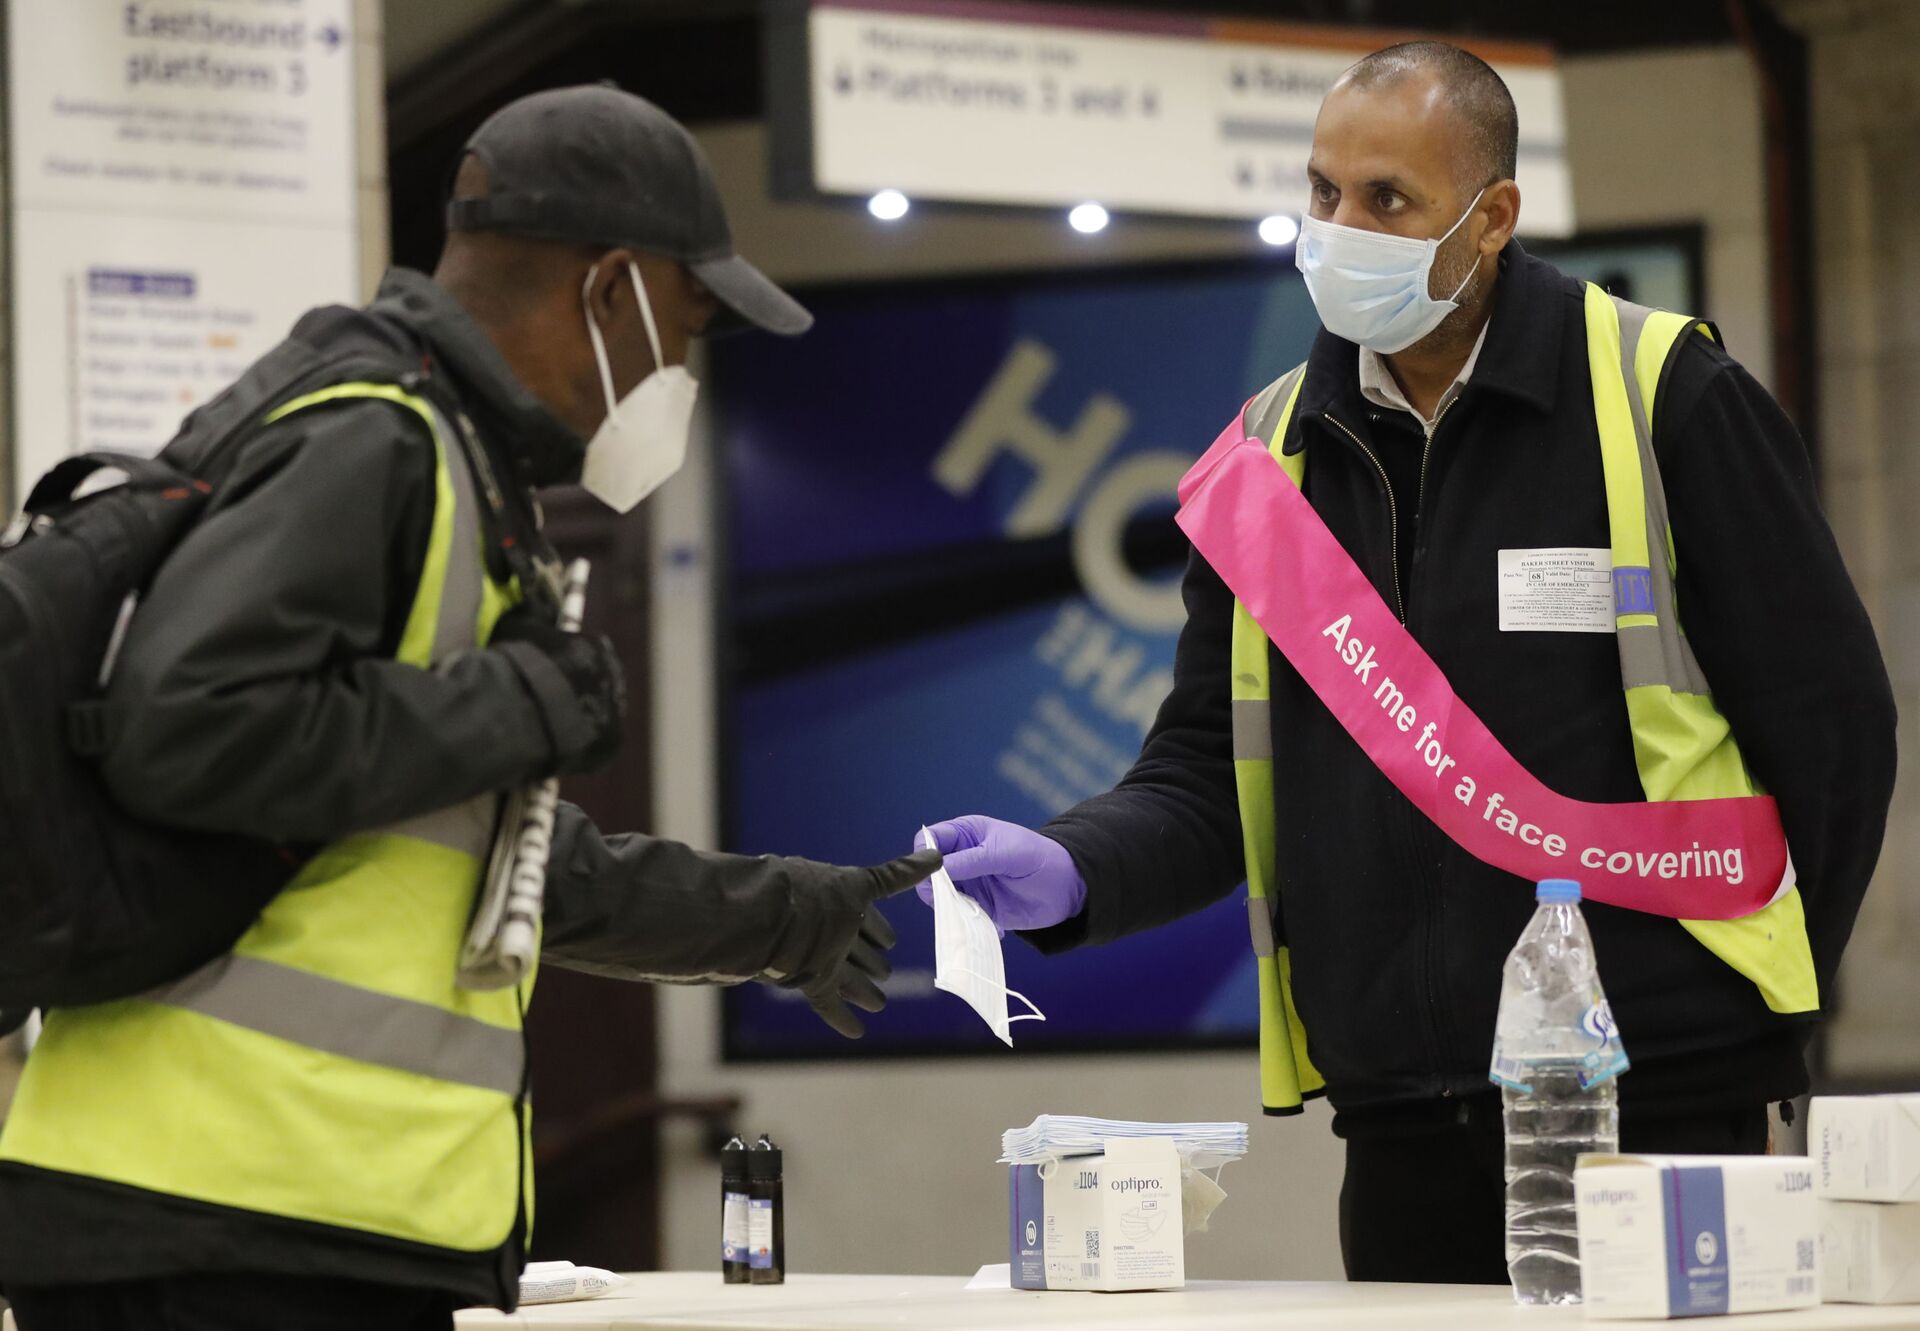 A London Underground worker, right, hands over a free face masks to a passenger at London's Baker Street station, Tuesday, June 9, 2020. Wearing a face mask will become compulsory on the London TFL public transport service starting from June 15, 2020, as a safety measure to contrast the COVID-19 pandemic.  - Sputnik International, 1920, 24.10.2021